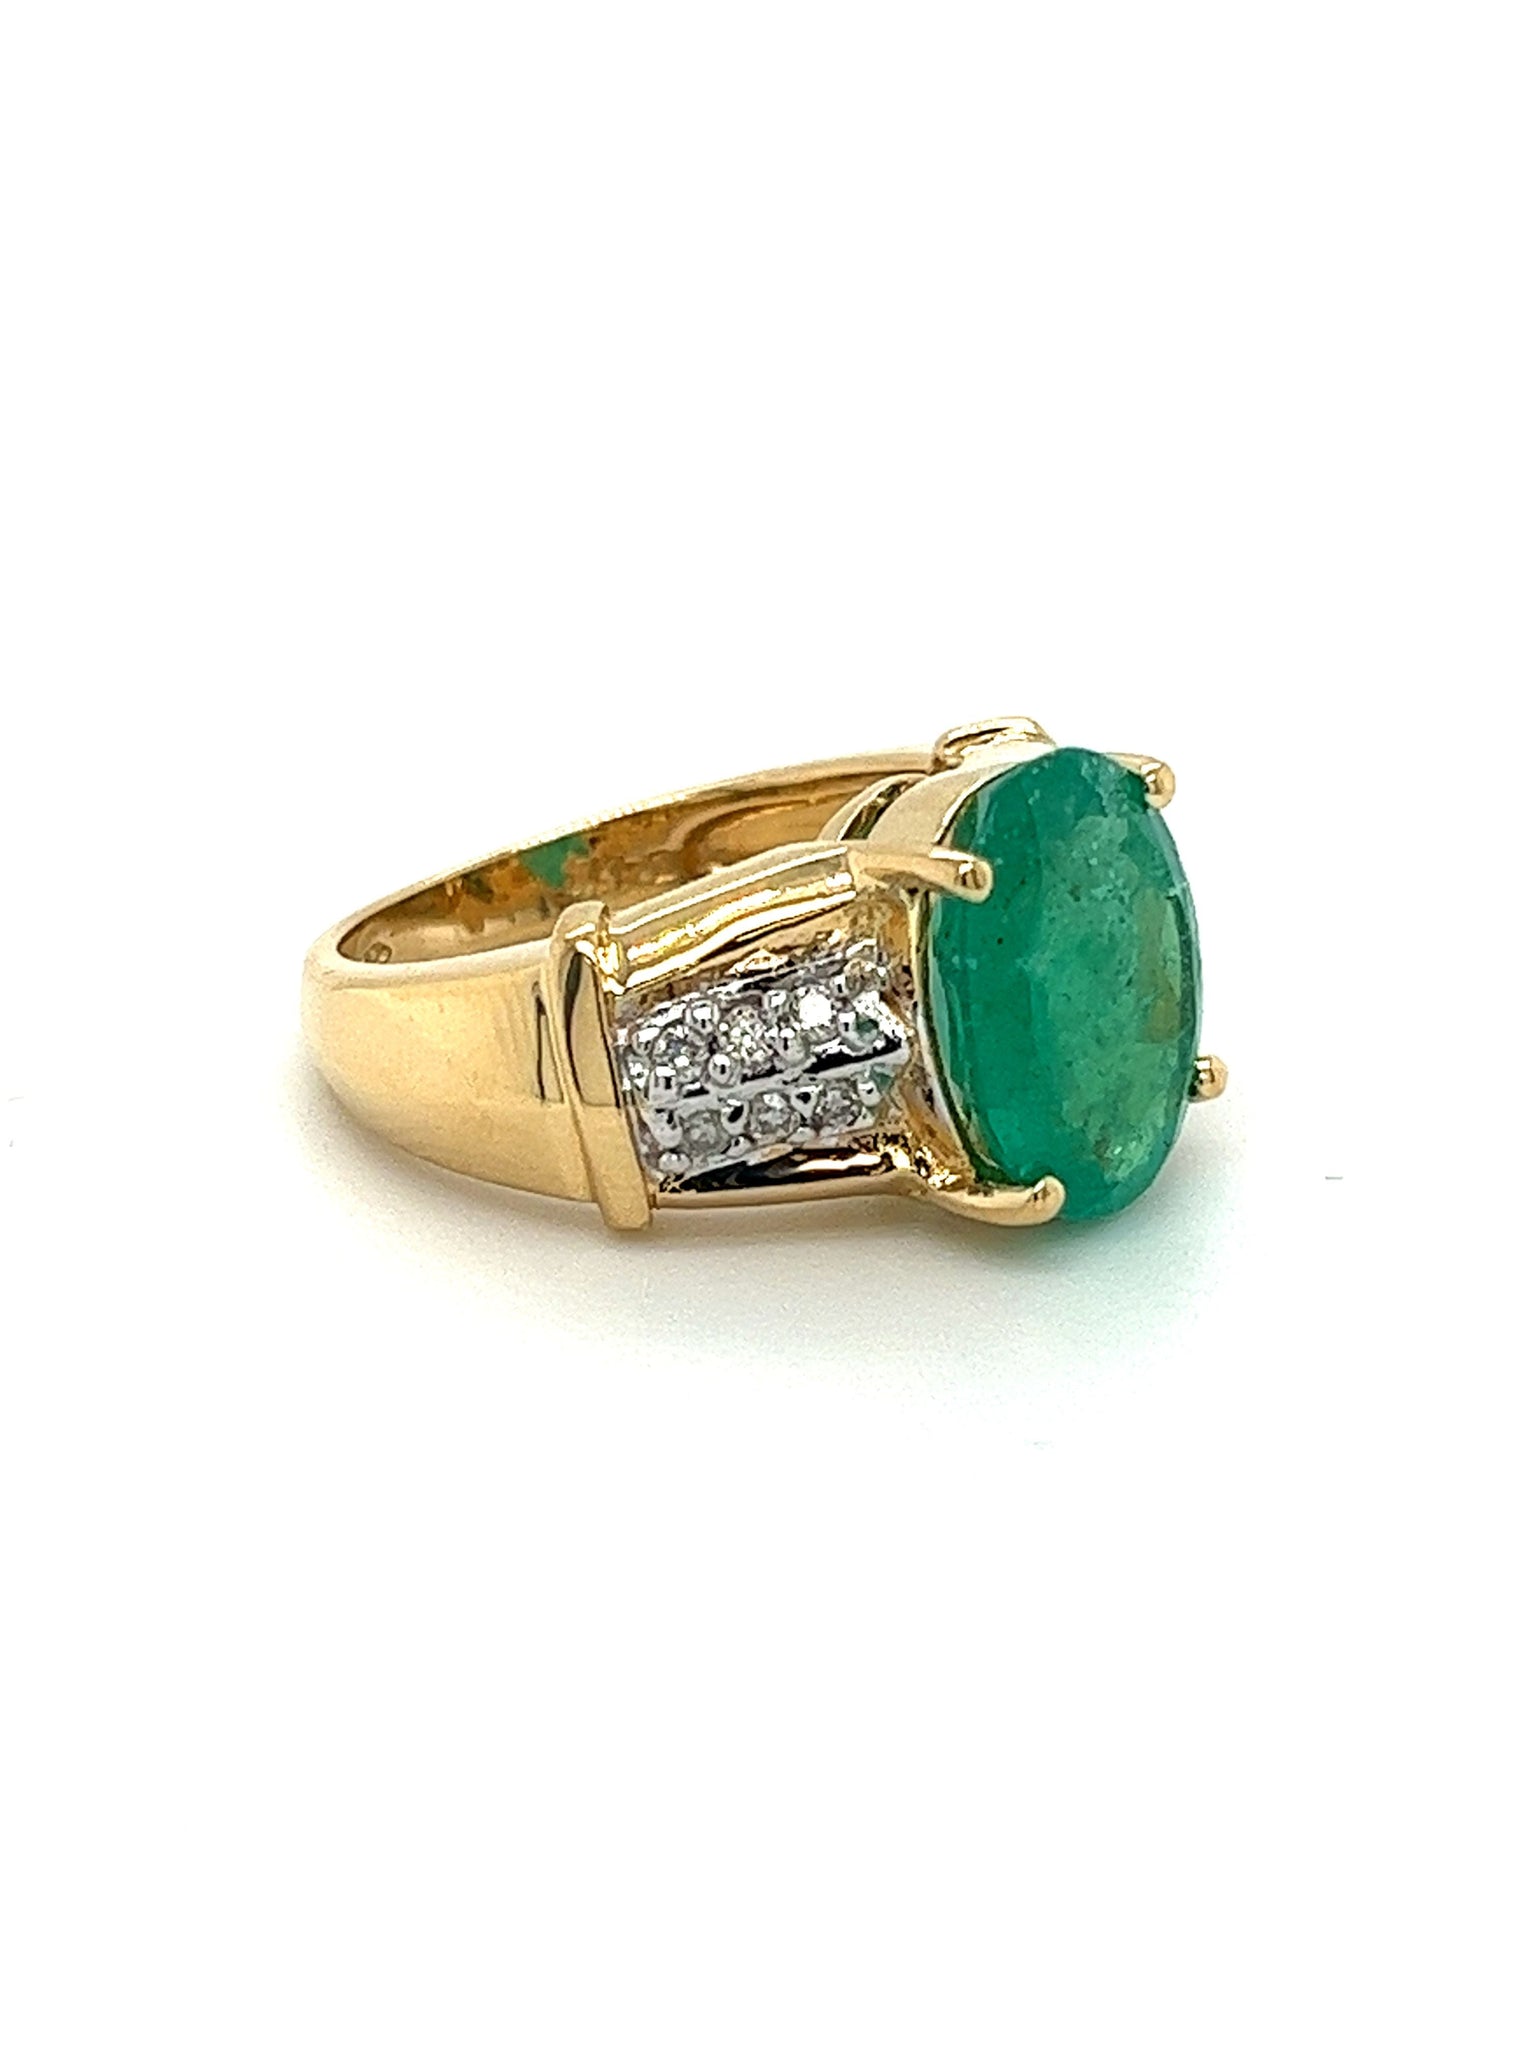 4.14 Carat Oval Cut Natural Emerald and Diamond Ring in 18K Yellow Gold